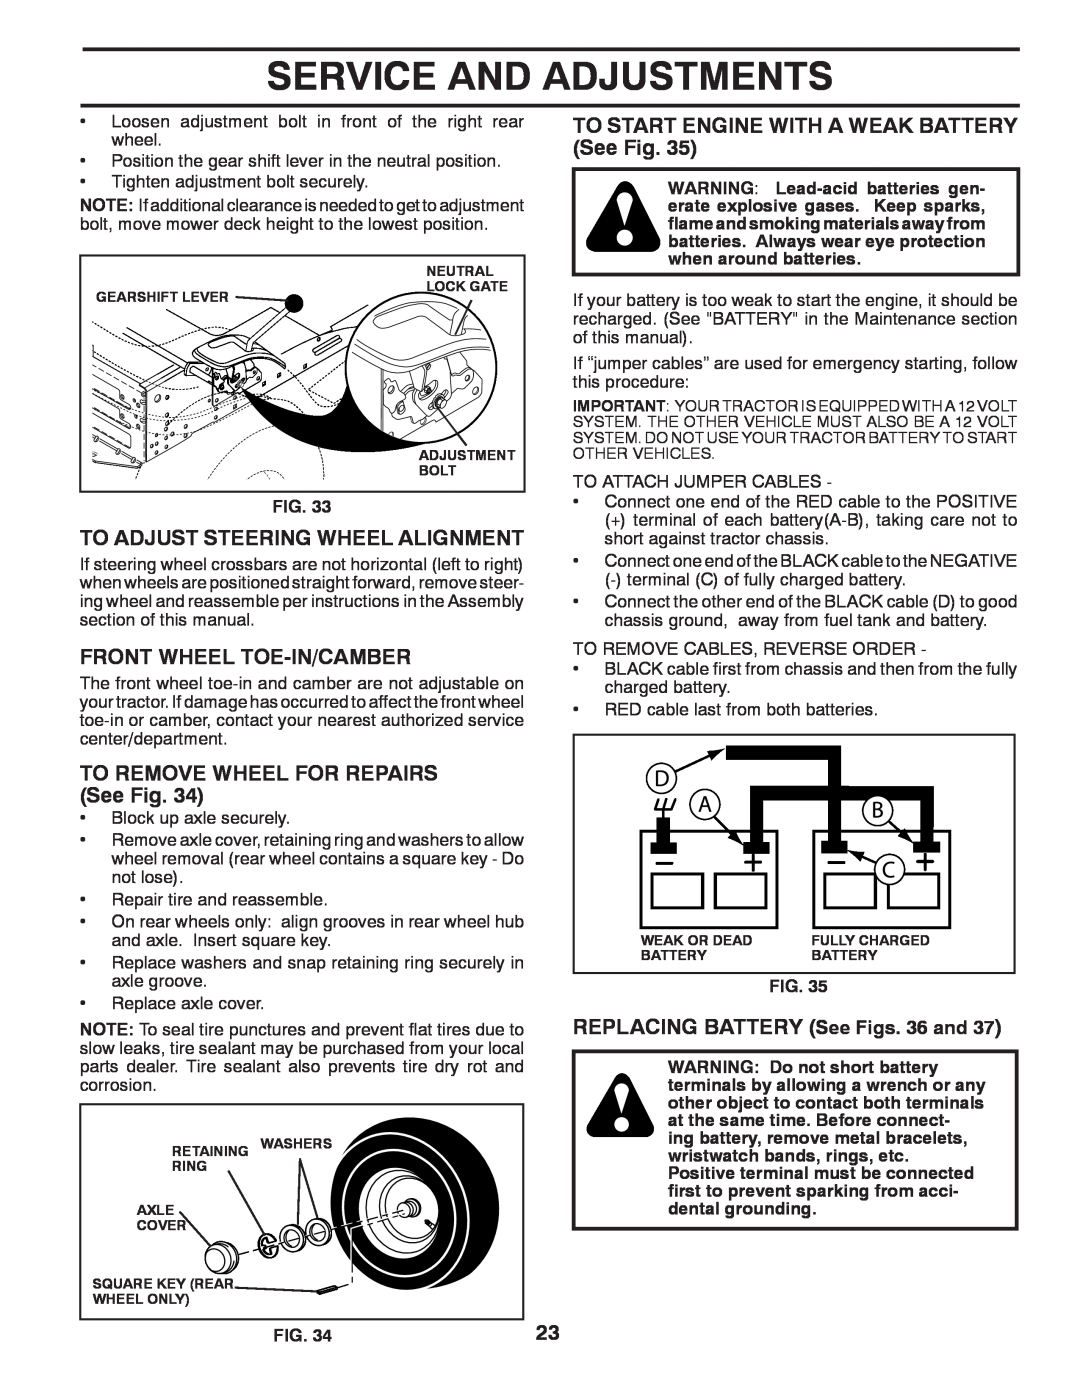 Poulan 96042003505 manual Service And Adjustments, To Adjust Steering Wheel Alignment, Front Wheel Toe-In/Camber 